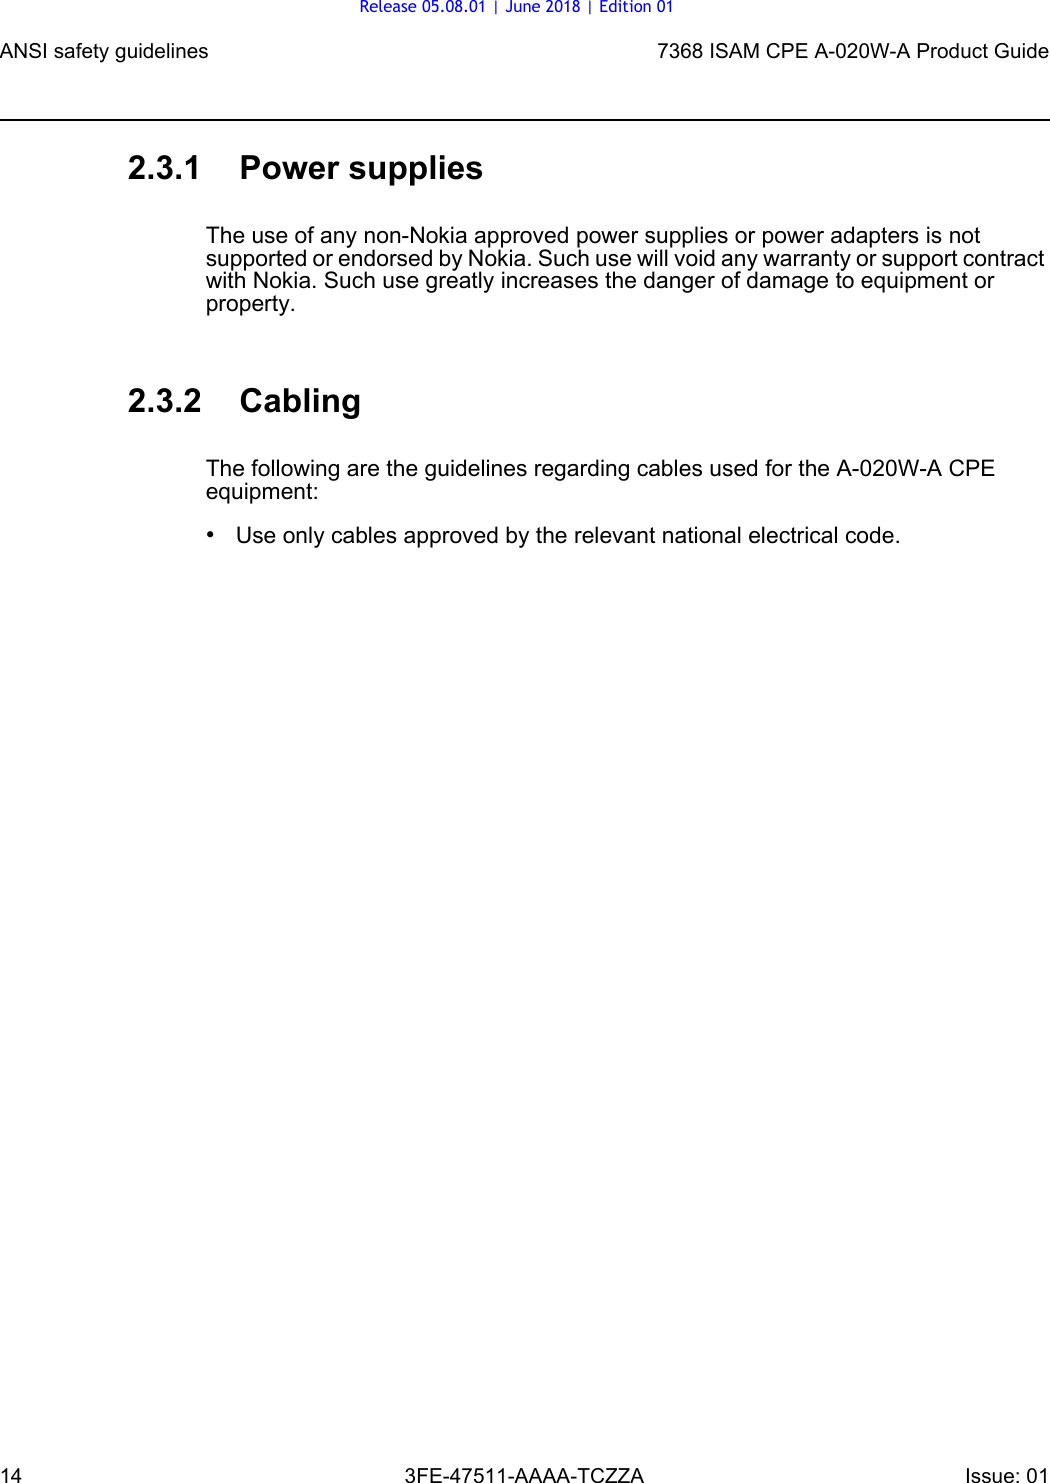 ANSI safety guidelines147368 ISAM CPE A-020W-A Product Guide3FE-47511-AAAA-TCZZA Issue: 01 2.3.1 Power suppliesThe use of any non-Nokia approved power supplies or power adapters is not supported or endorsed by Nokia. Such use will void any warranty or support contract with Nokia. Such use greatly increases the danger of damage to equipment or property.2.3.2 CablingThe following are the guidelines regarding cables used for the A-020W-A CPE equipment:•Use only cables approved by the relevant national electrical code.Release 05.08.01 | June 2018 | Edition 01